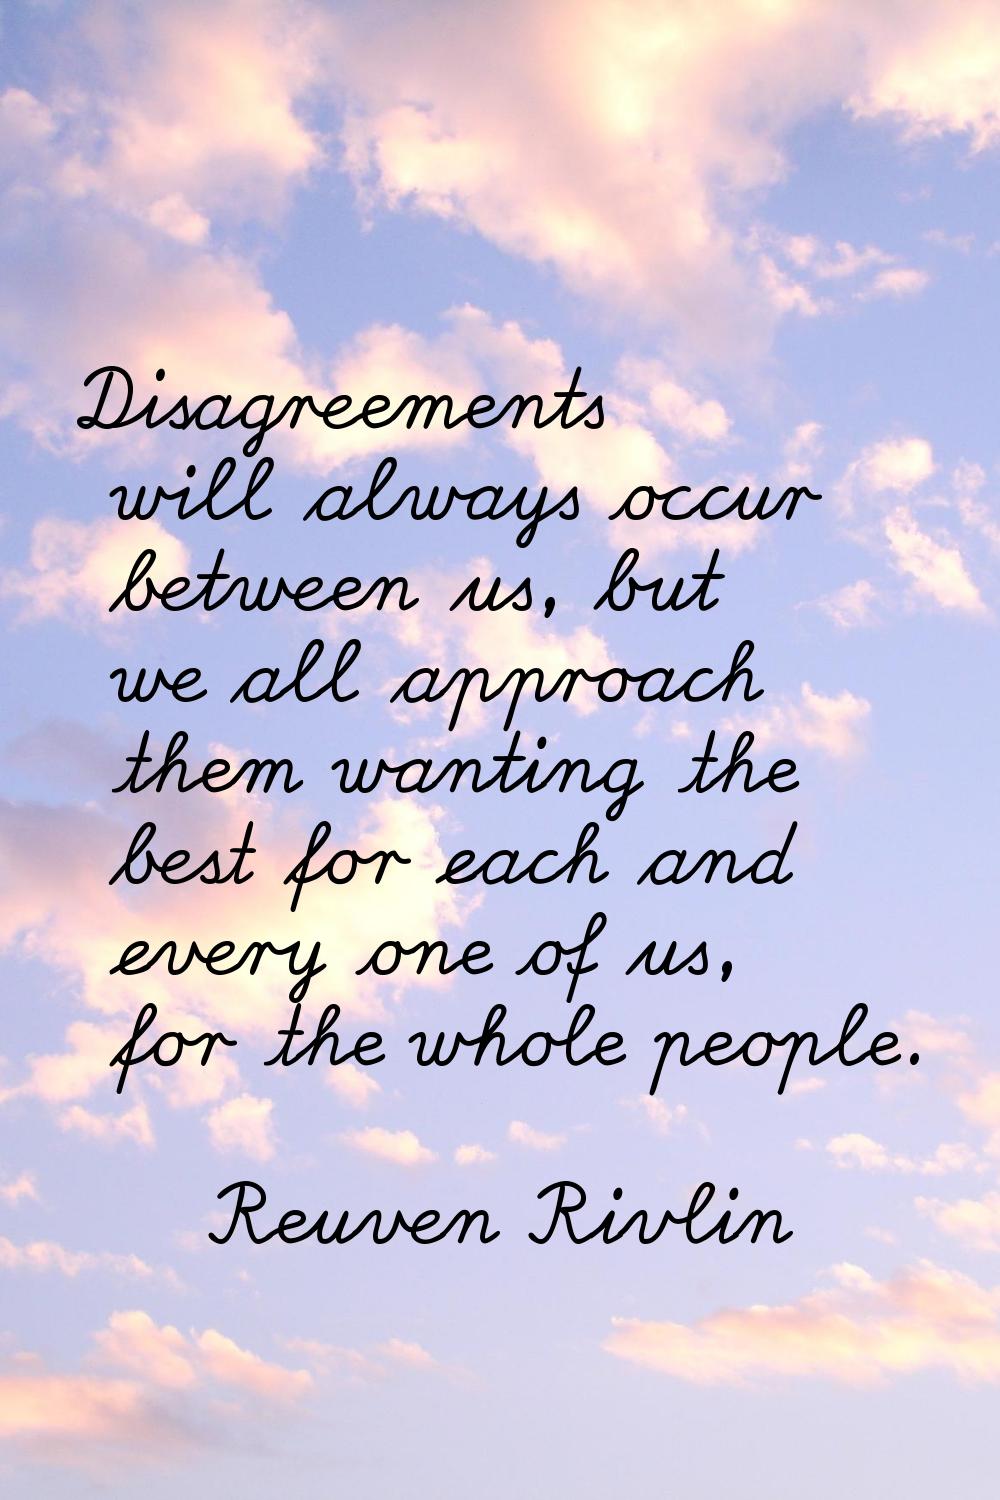 Disagreements will always occur between us, but we all approach them wanting the best for each and 